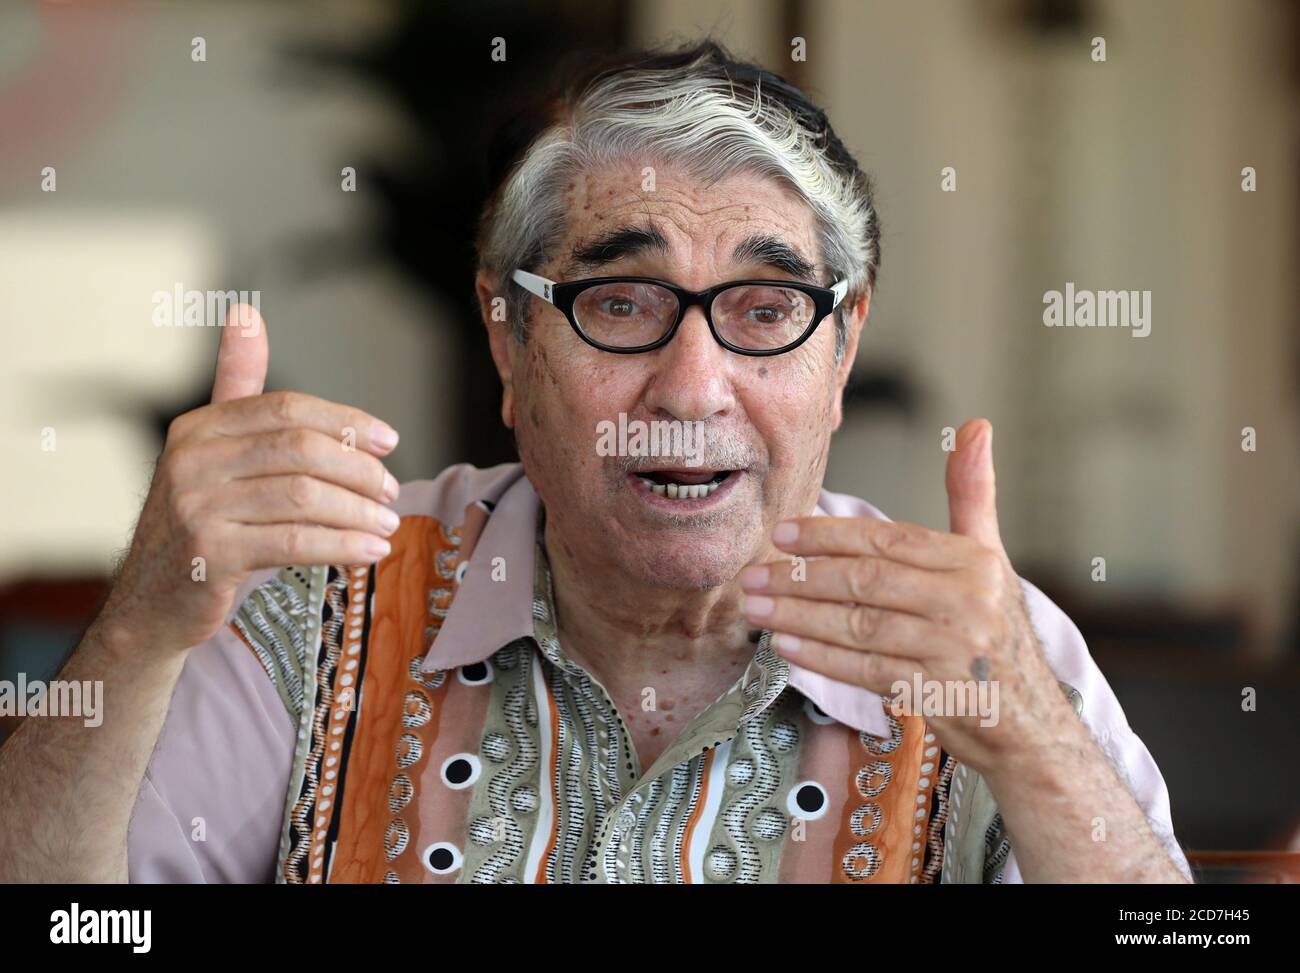 Salah Tizani, 92, known as Abou Salim and one of Lebanon’s first TV celebrities, speaks during an interview with Reuters at a cafe in Beirut, Lebanon August 12, 2020. Picture taken August 12, 2020. REUTERS/Mohamed Azakir Stock Photo